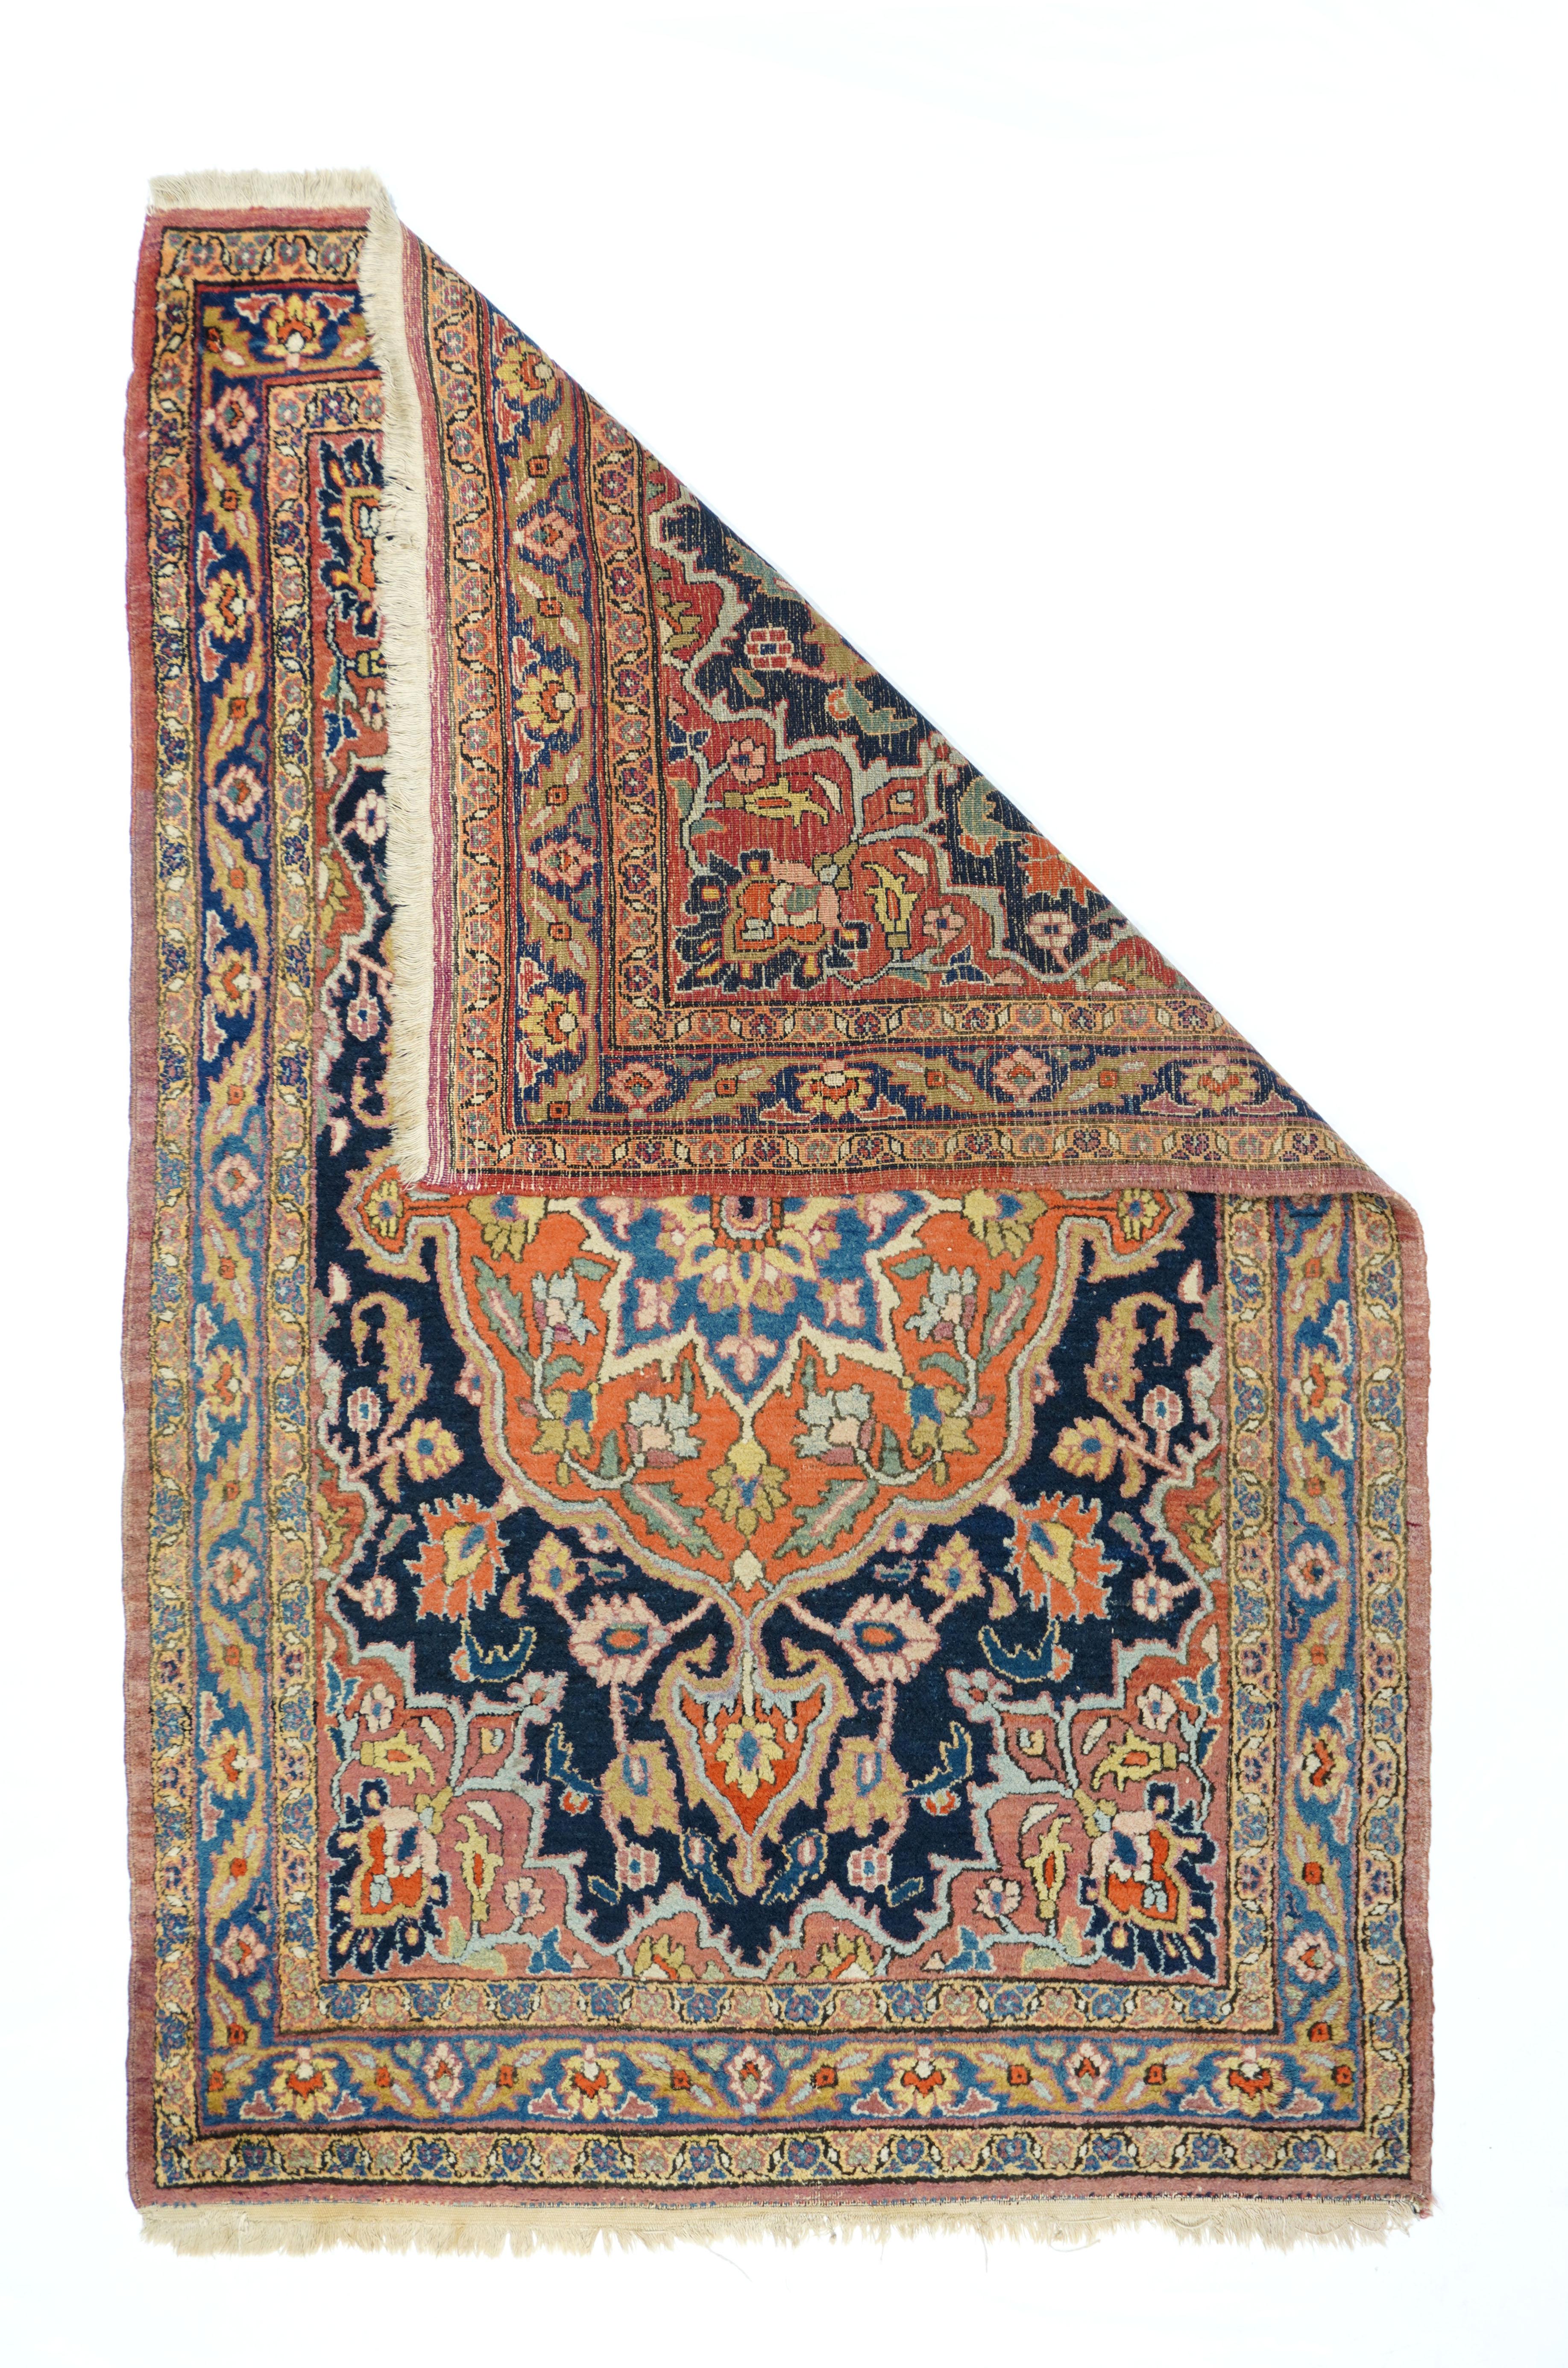 Antique Doroksh rug 4' x 6'2''. Dorokhsh is a town in the Qainat area of Khorassan province near Mashad in ne Persia and is known for its finely woven rugs, primarily scatters, with a pungent, natural rust-orange. Here the large broadly scalloped